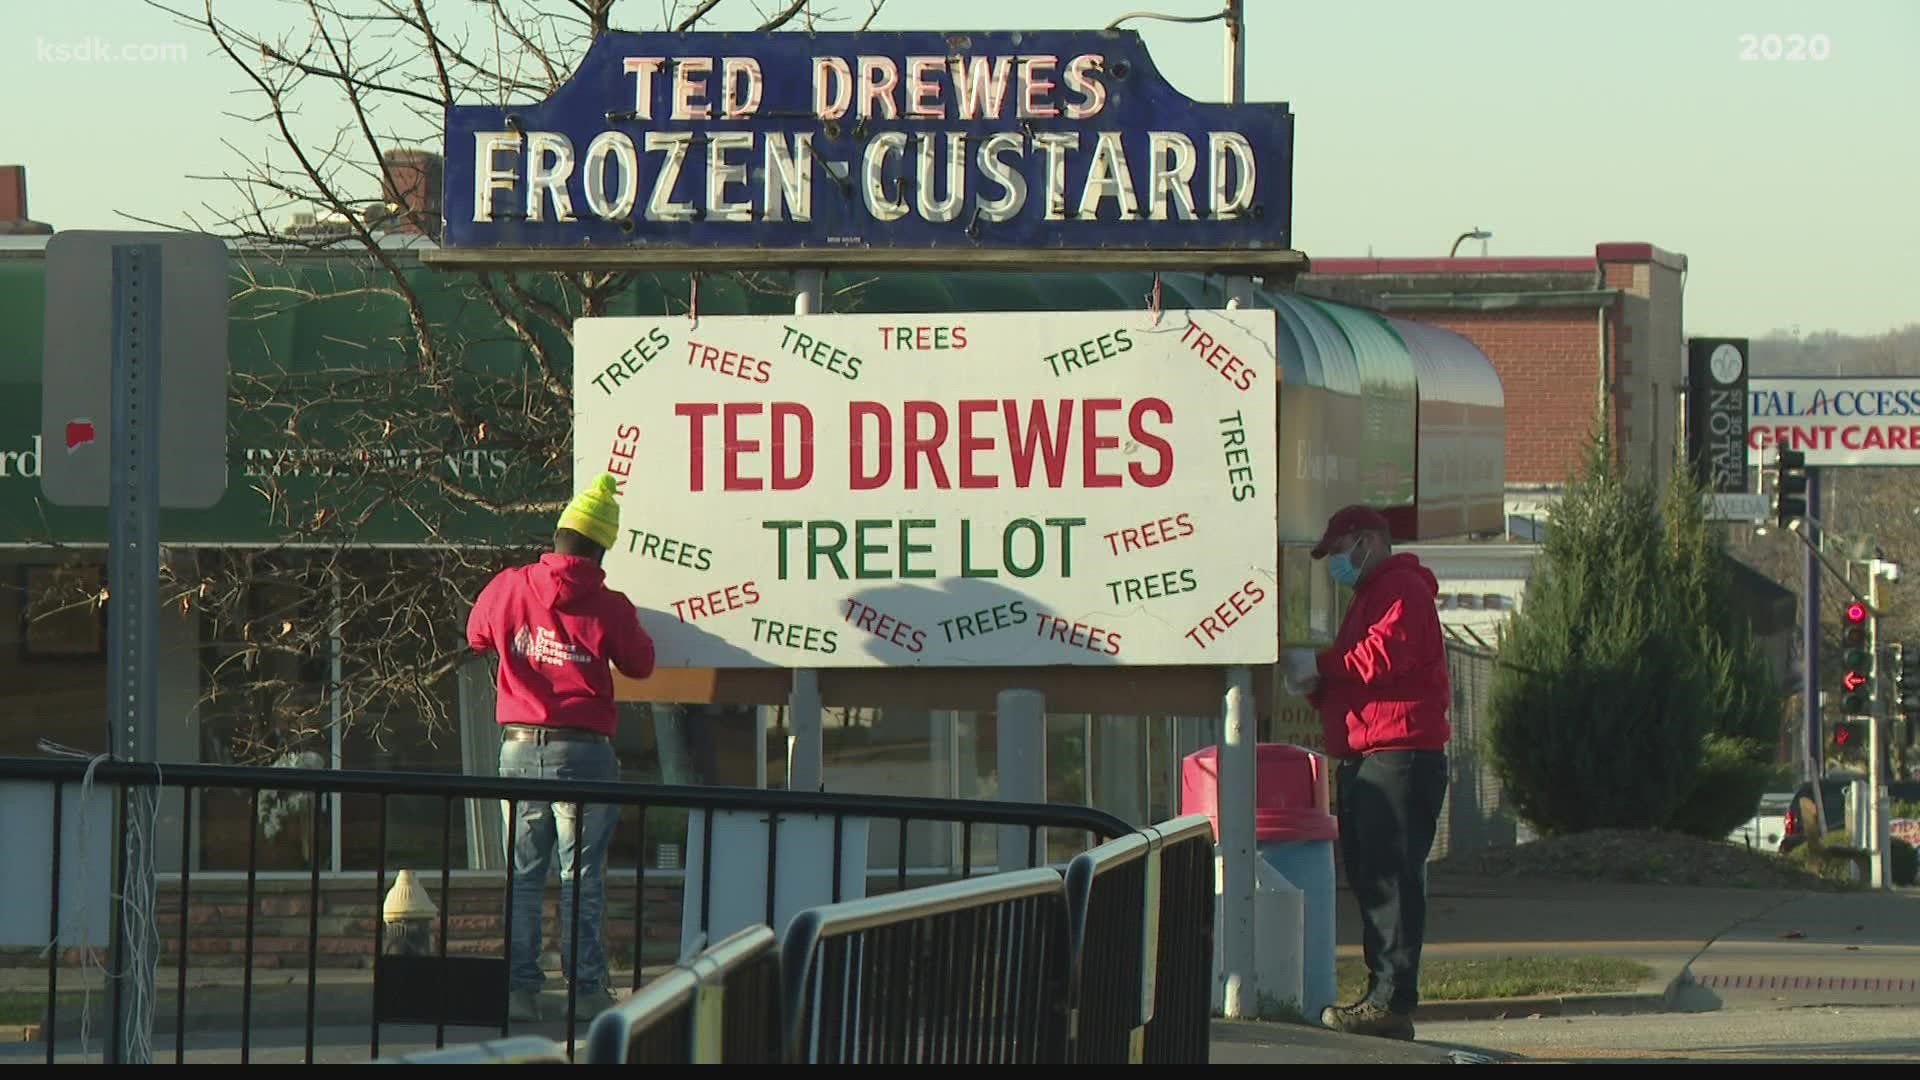 The Drewes family travels to their tree farm in Nova Scotia every year to handpick trees to bring back to St. Louis.